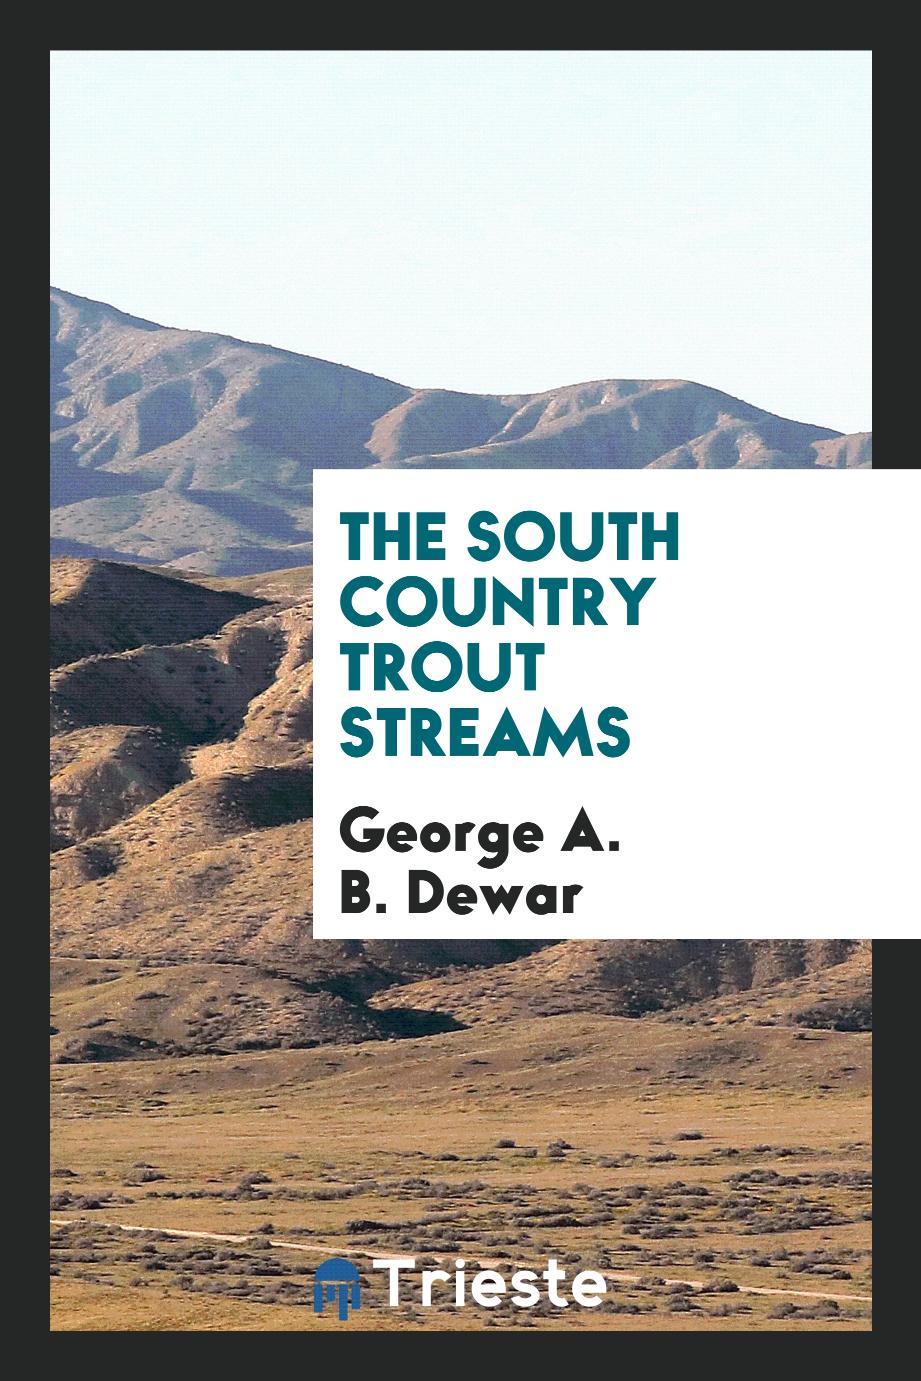 The south country trout streams